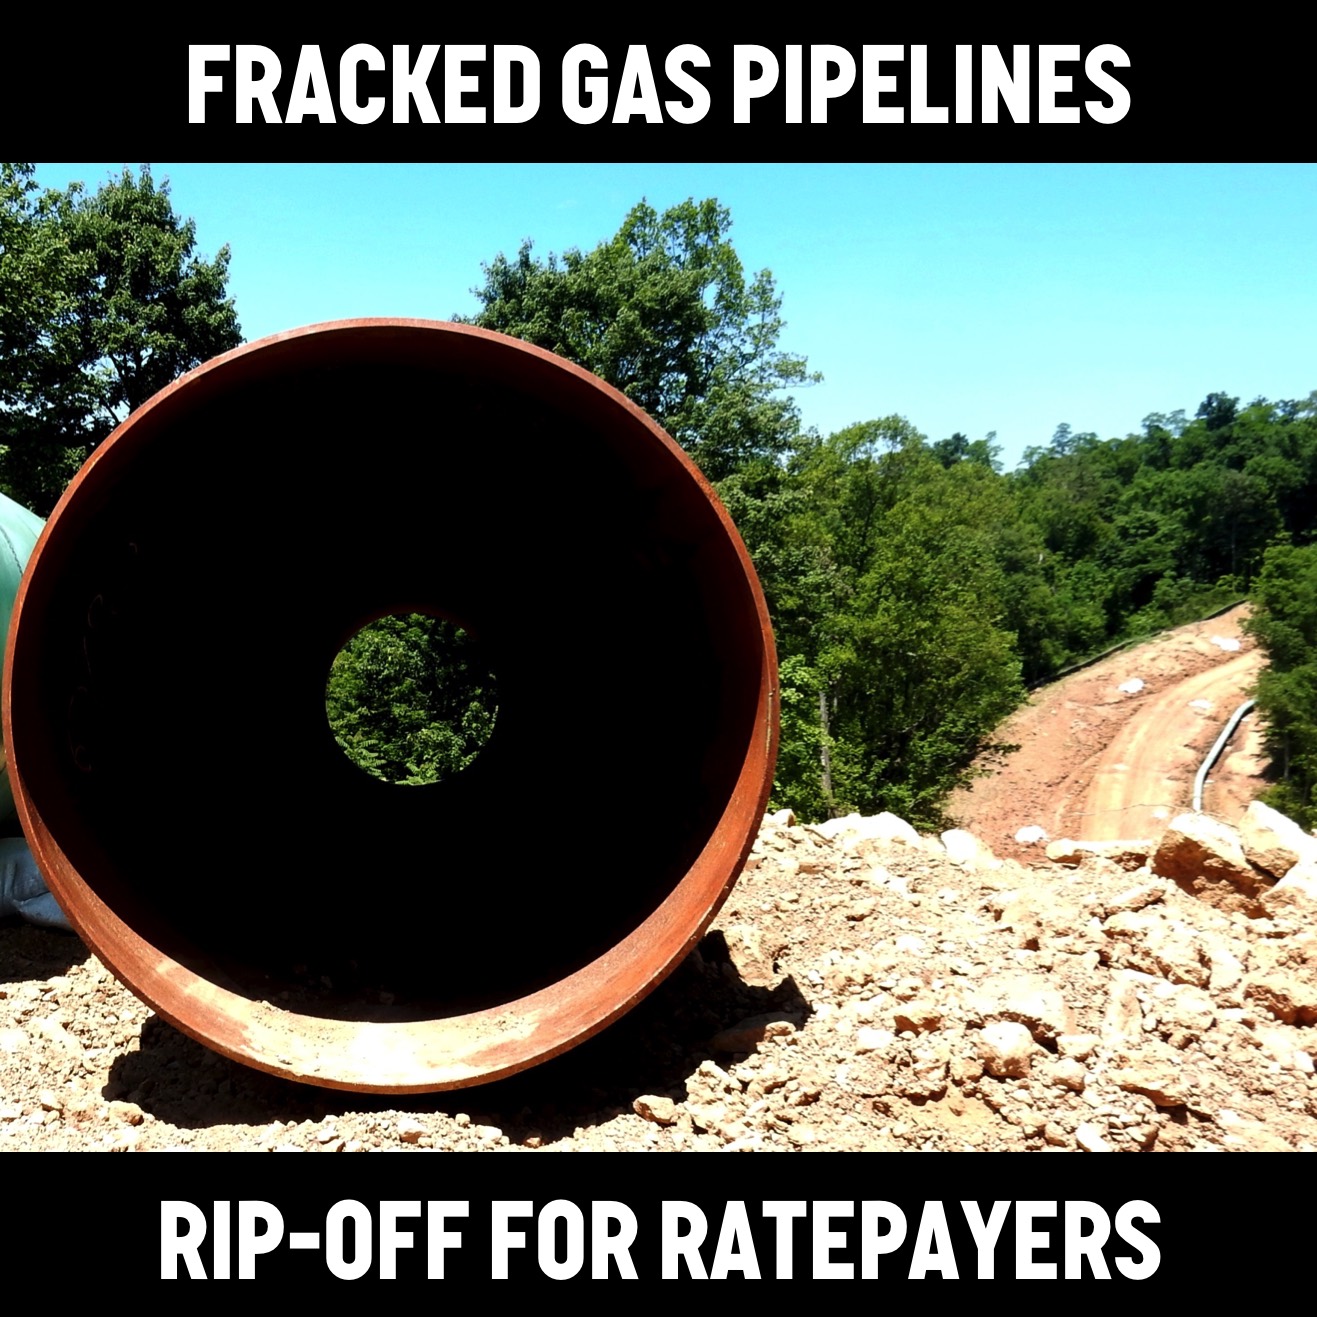 Fracked gas pipelines are rip-offs for ratepayers